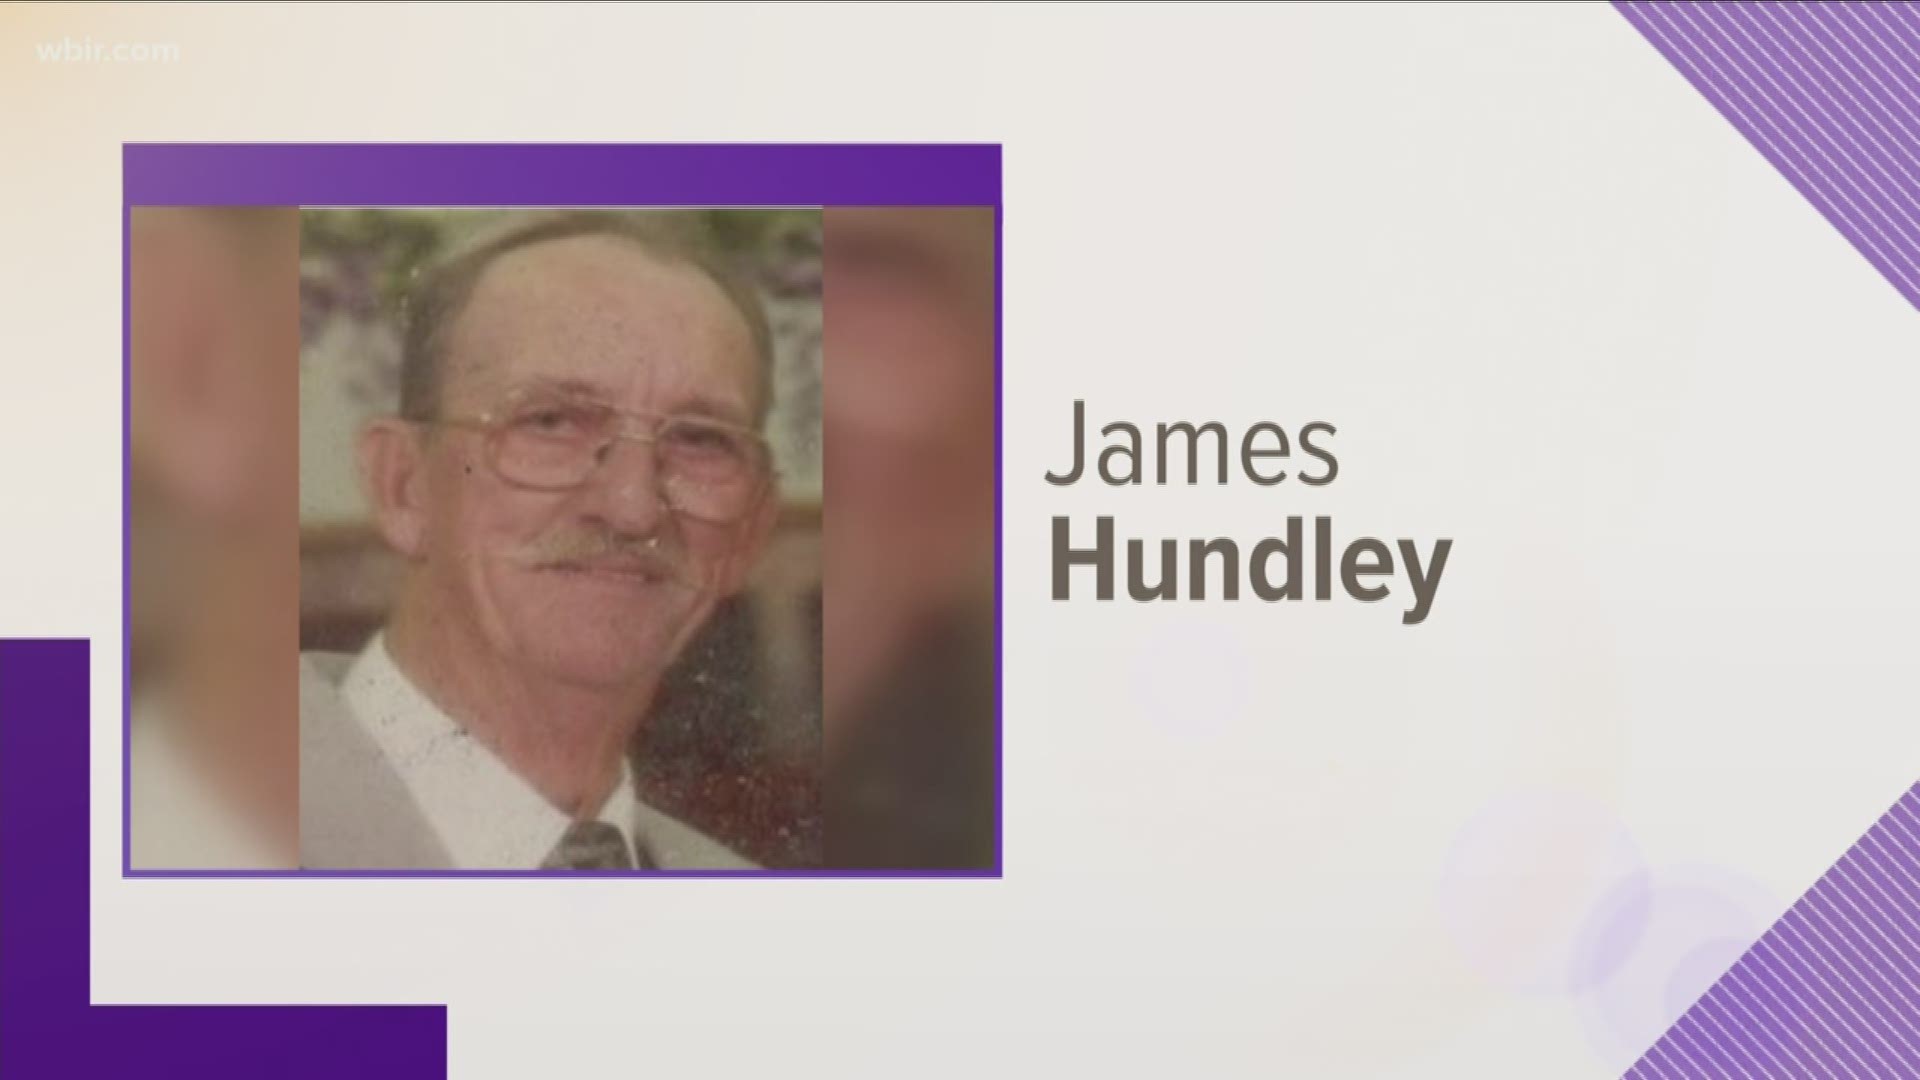 In February of 2010-- James Hundley was found dead with a gunshot wound at a home he was renovating on Mitchell Street in North Knoxville.